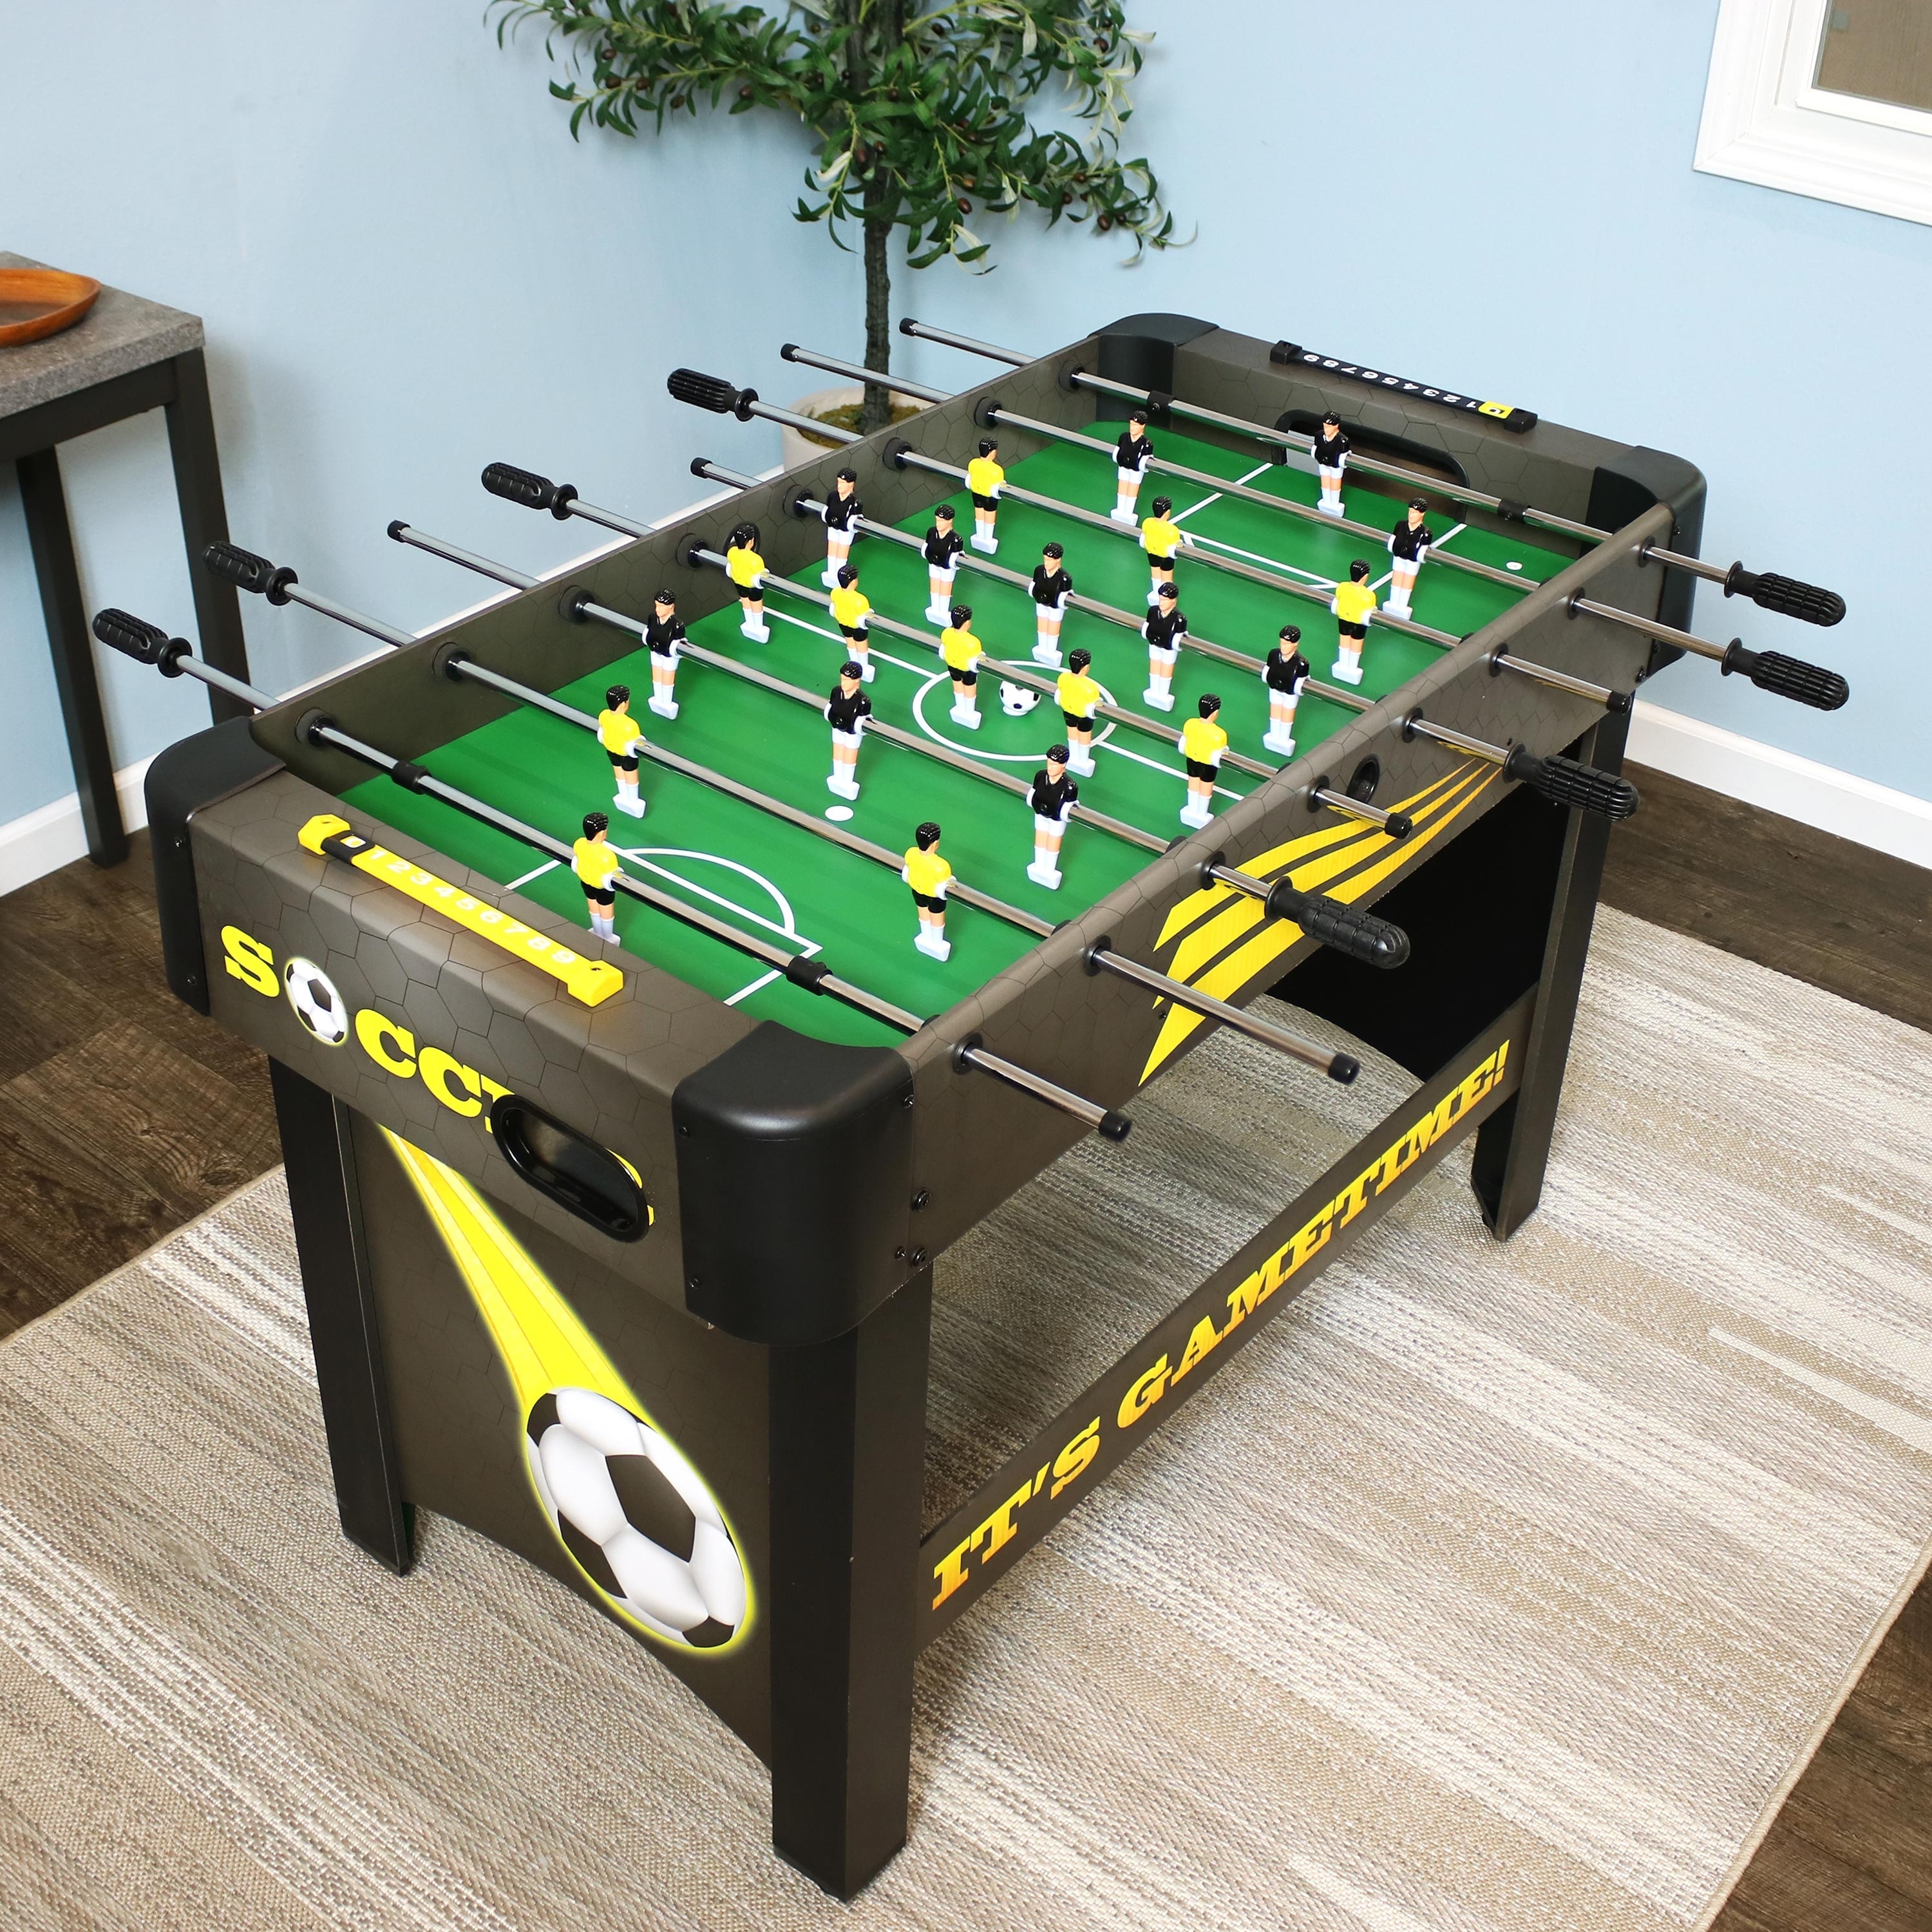 48-Inch Foosball Soccer Game Table Top Foosball Game On Sale Overstock - 11599014